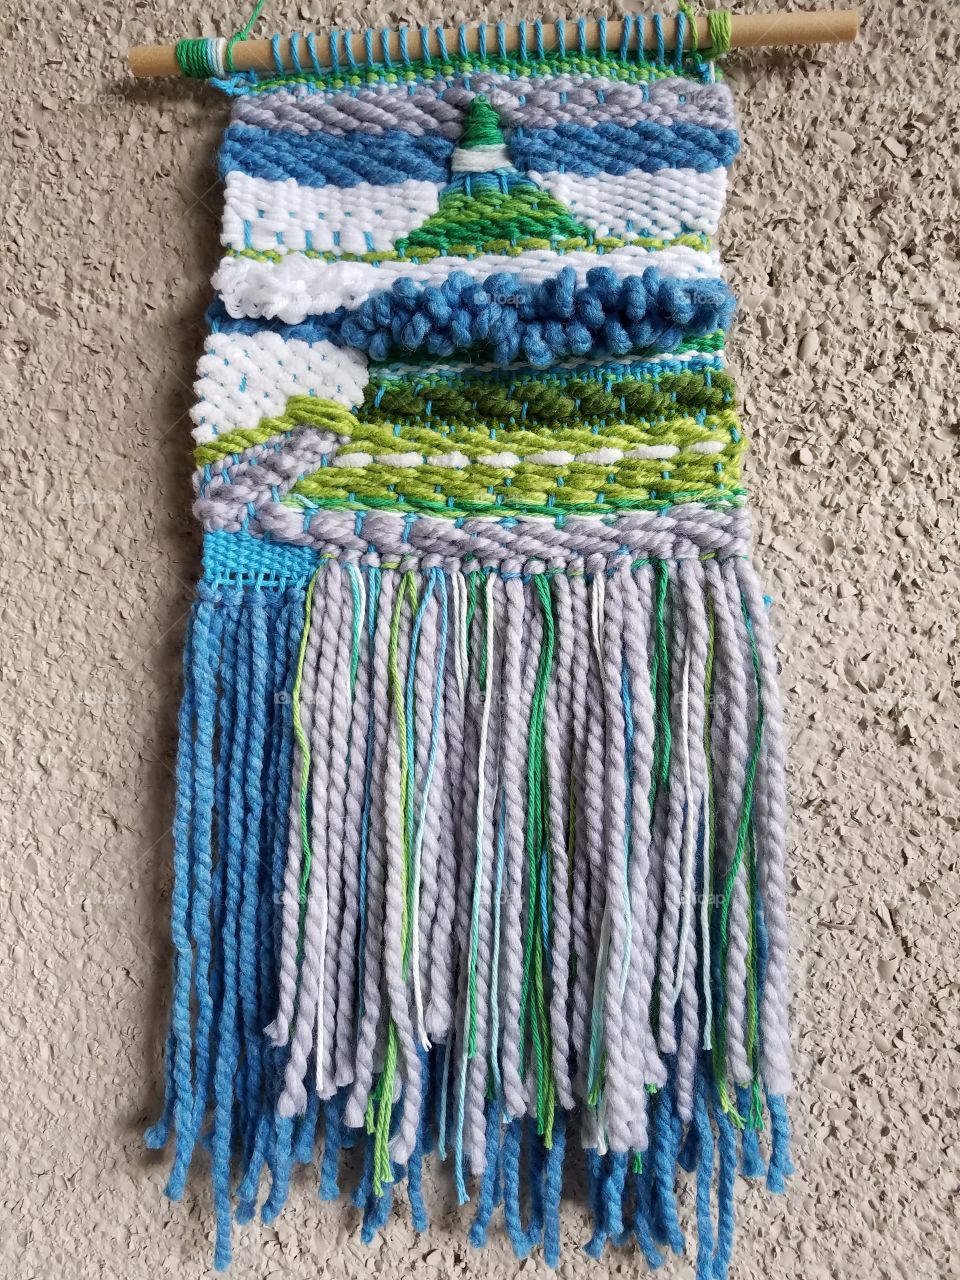 Weaving in Blues and Green